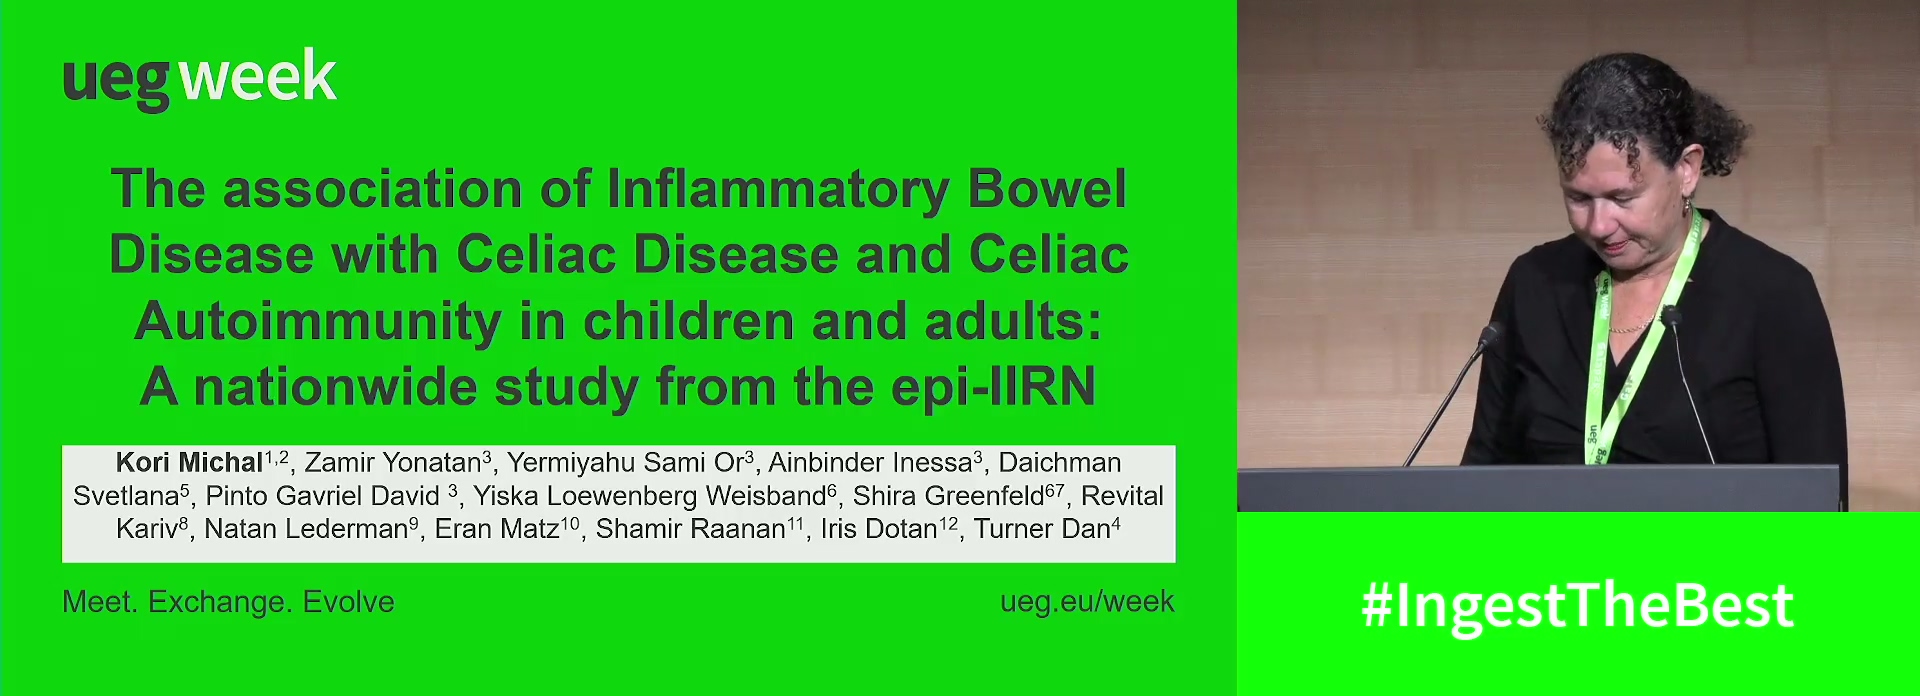 THE ASSOCIATION OF INFLAMMATORY BOWEL DISEASE WITH CELIAC DISEASE AND CELIAC AUTOIMMUNITY, IN CHILDREN AND ADULTS: A NATIONWIDE STUDY FROM THE EPI-IIRN